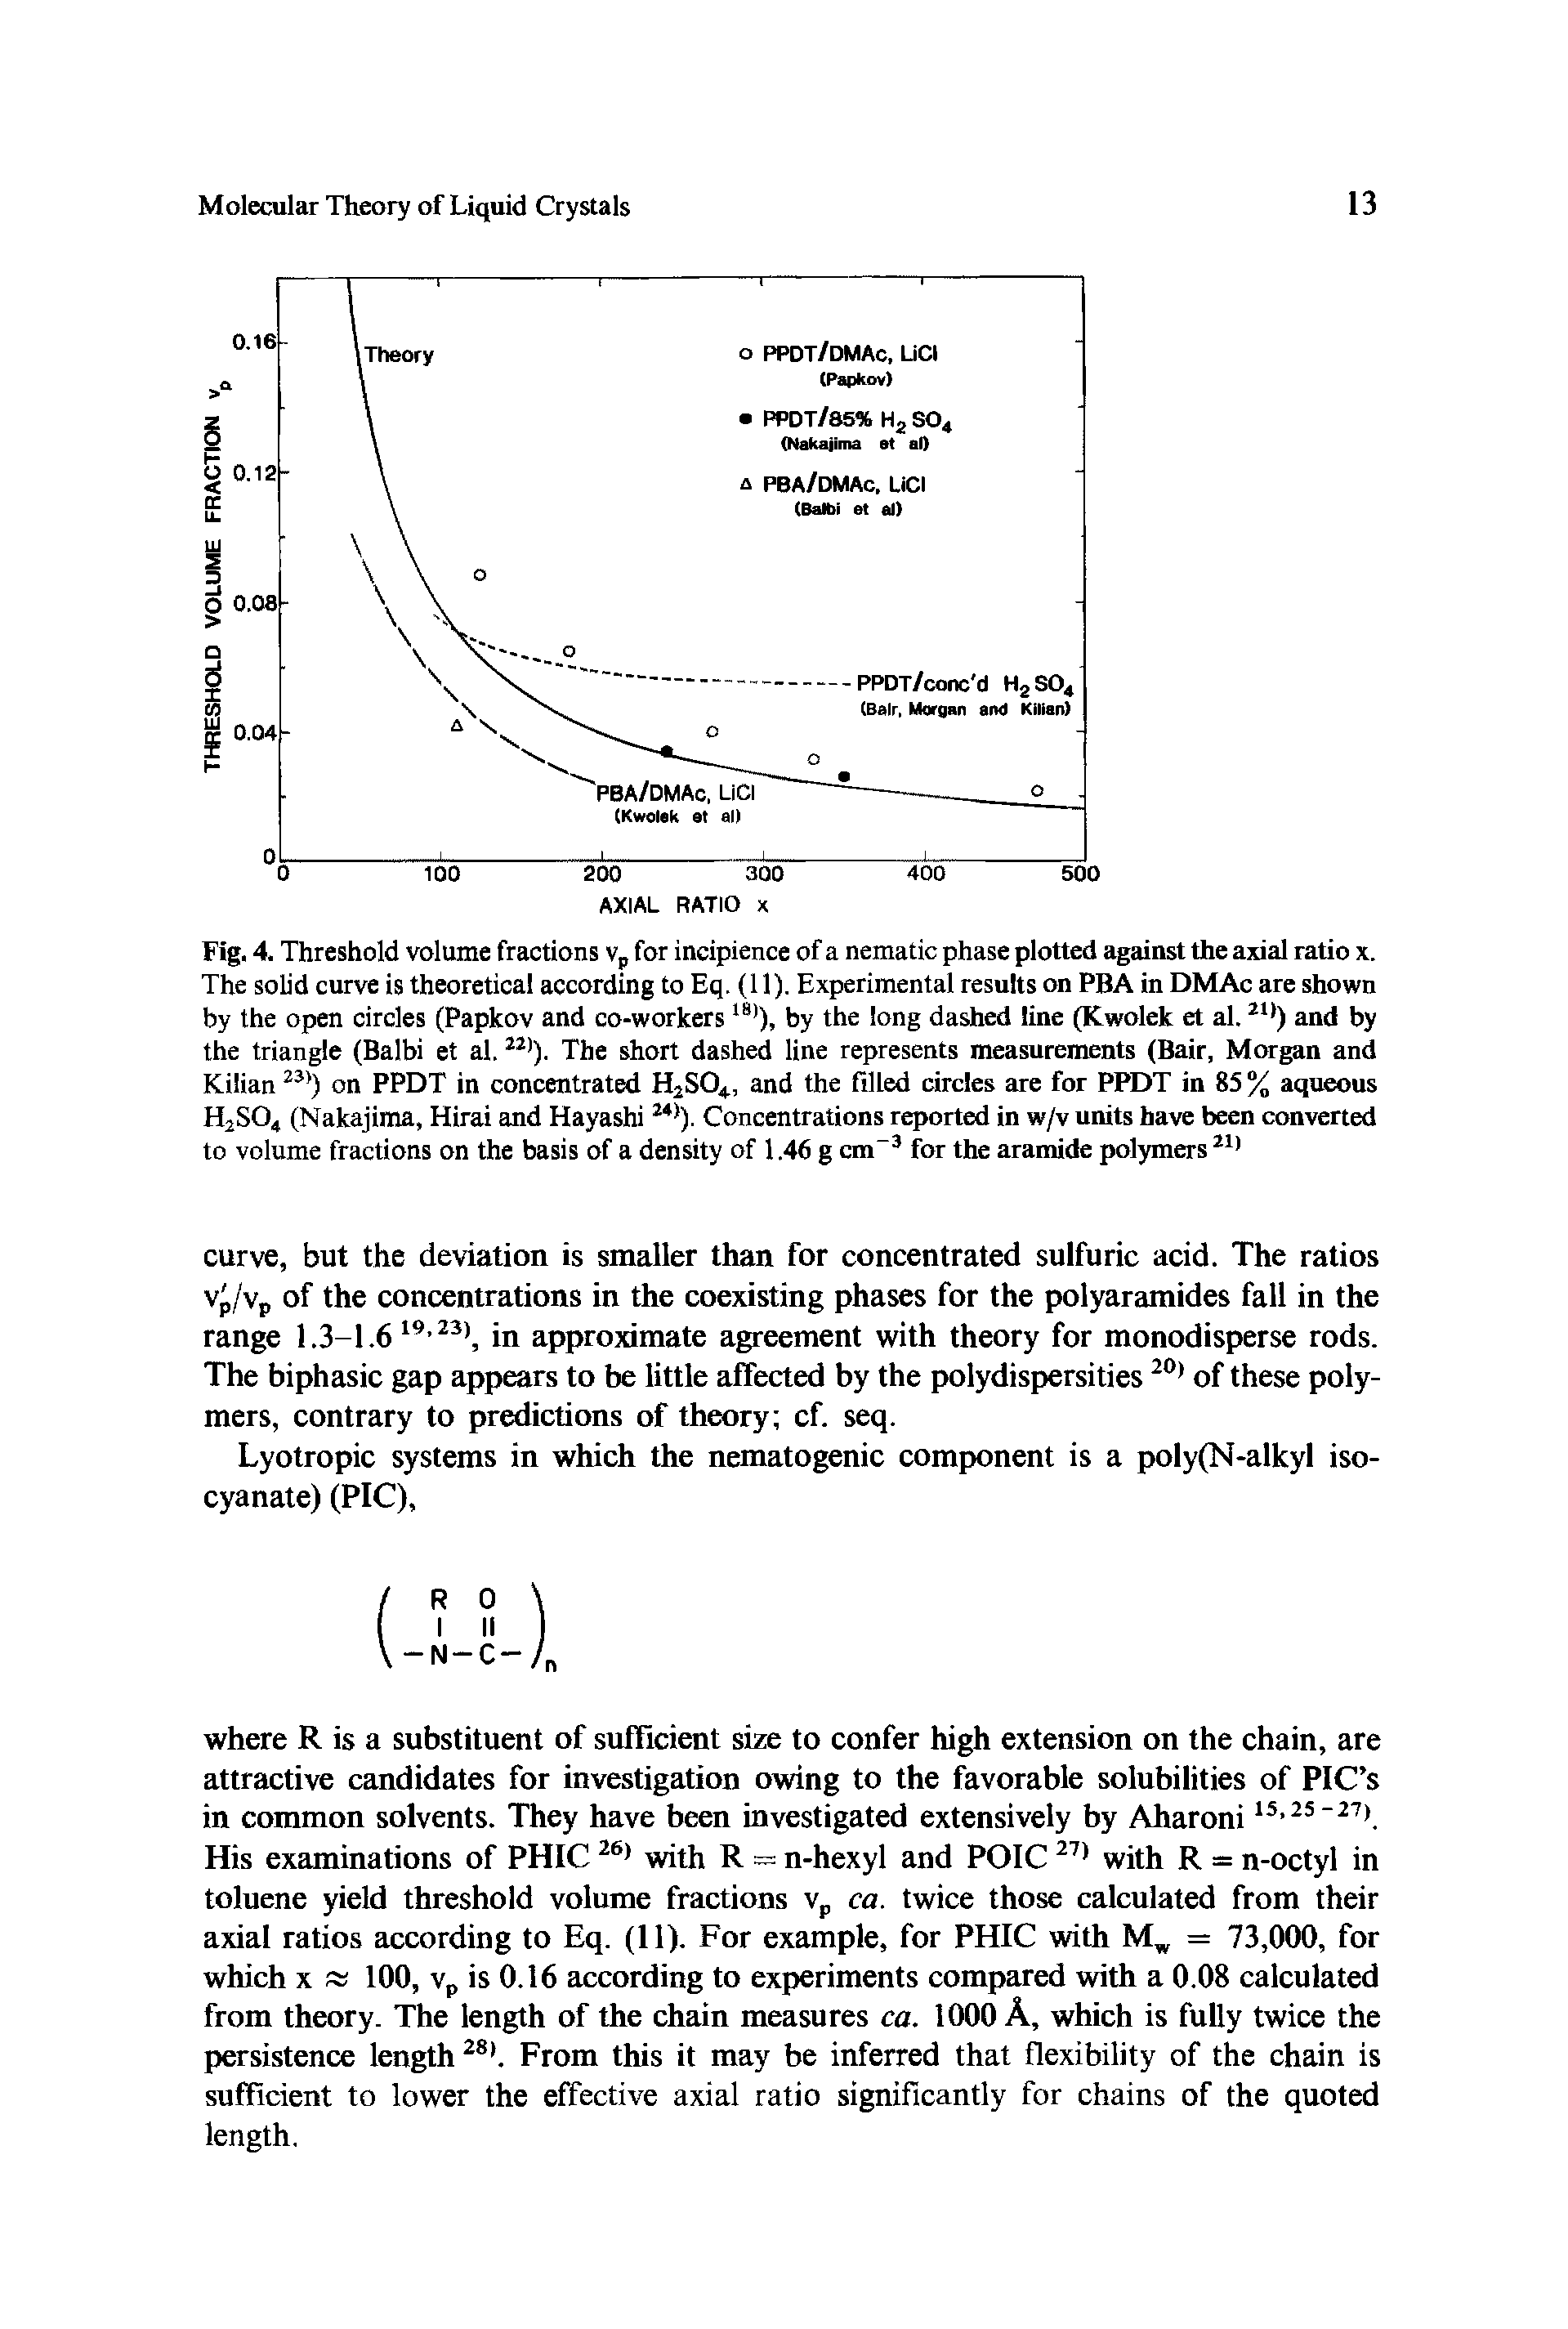 Fig. 4. Threshold volume fractions Vp for incipience of a nematic phase plotted against the axial ratio x. The solid curve is theoretical according to Eq, (11). Experimental results on PBA in DMAc are shown by the open circles (Papkov and co-workers ), by the long dashed line (Kwolek et al. and by the triangle (Balbi et al. The short dashed line represents measurements (Bair, Morgan and Kilian on PPDT in concentrated HiSO, and the filled circles are for PPDT in 85 % aqueous H2SO4 (Nakajima, Hirai and Hayashi ). Concentrations reported in w/v units have been converted to volume fractions on the basis of a density of 1.46 g cm for the aramide polymers...